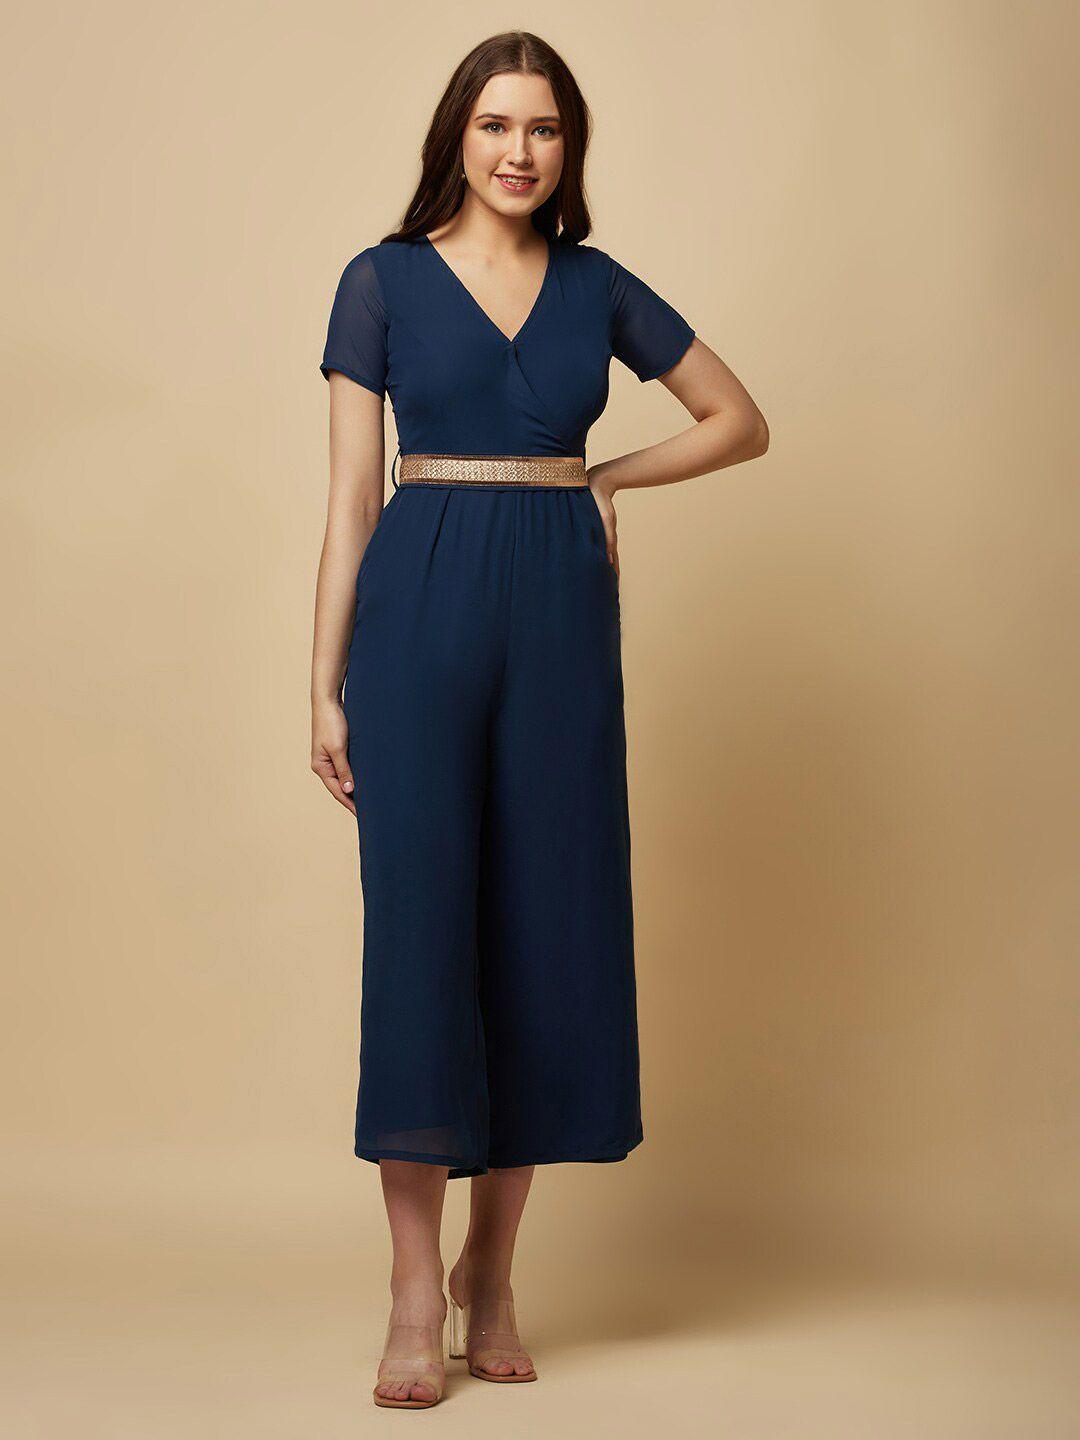 raassio v-neck short sleeves culotte jumpsuit with belt